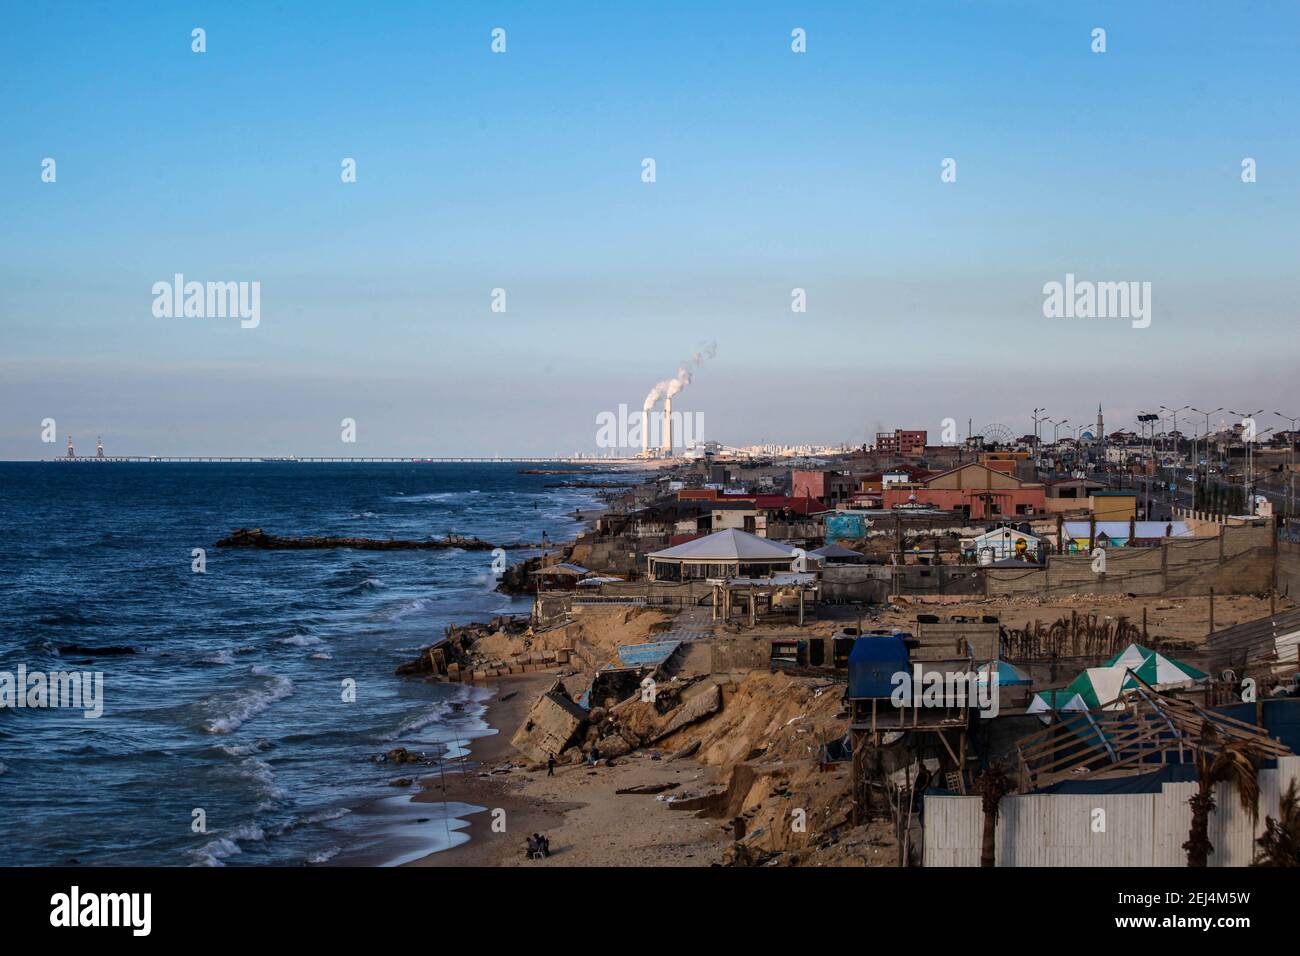 General view of the sea coast of Gaza City. February 20, 2021. Few Palestinians and some fishermen enjoy cold day, on beach in Gaza City. Photo by Ramez Habboub/ABACAPRESS.COM Stock Photo